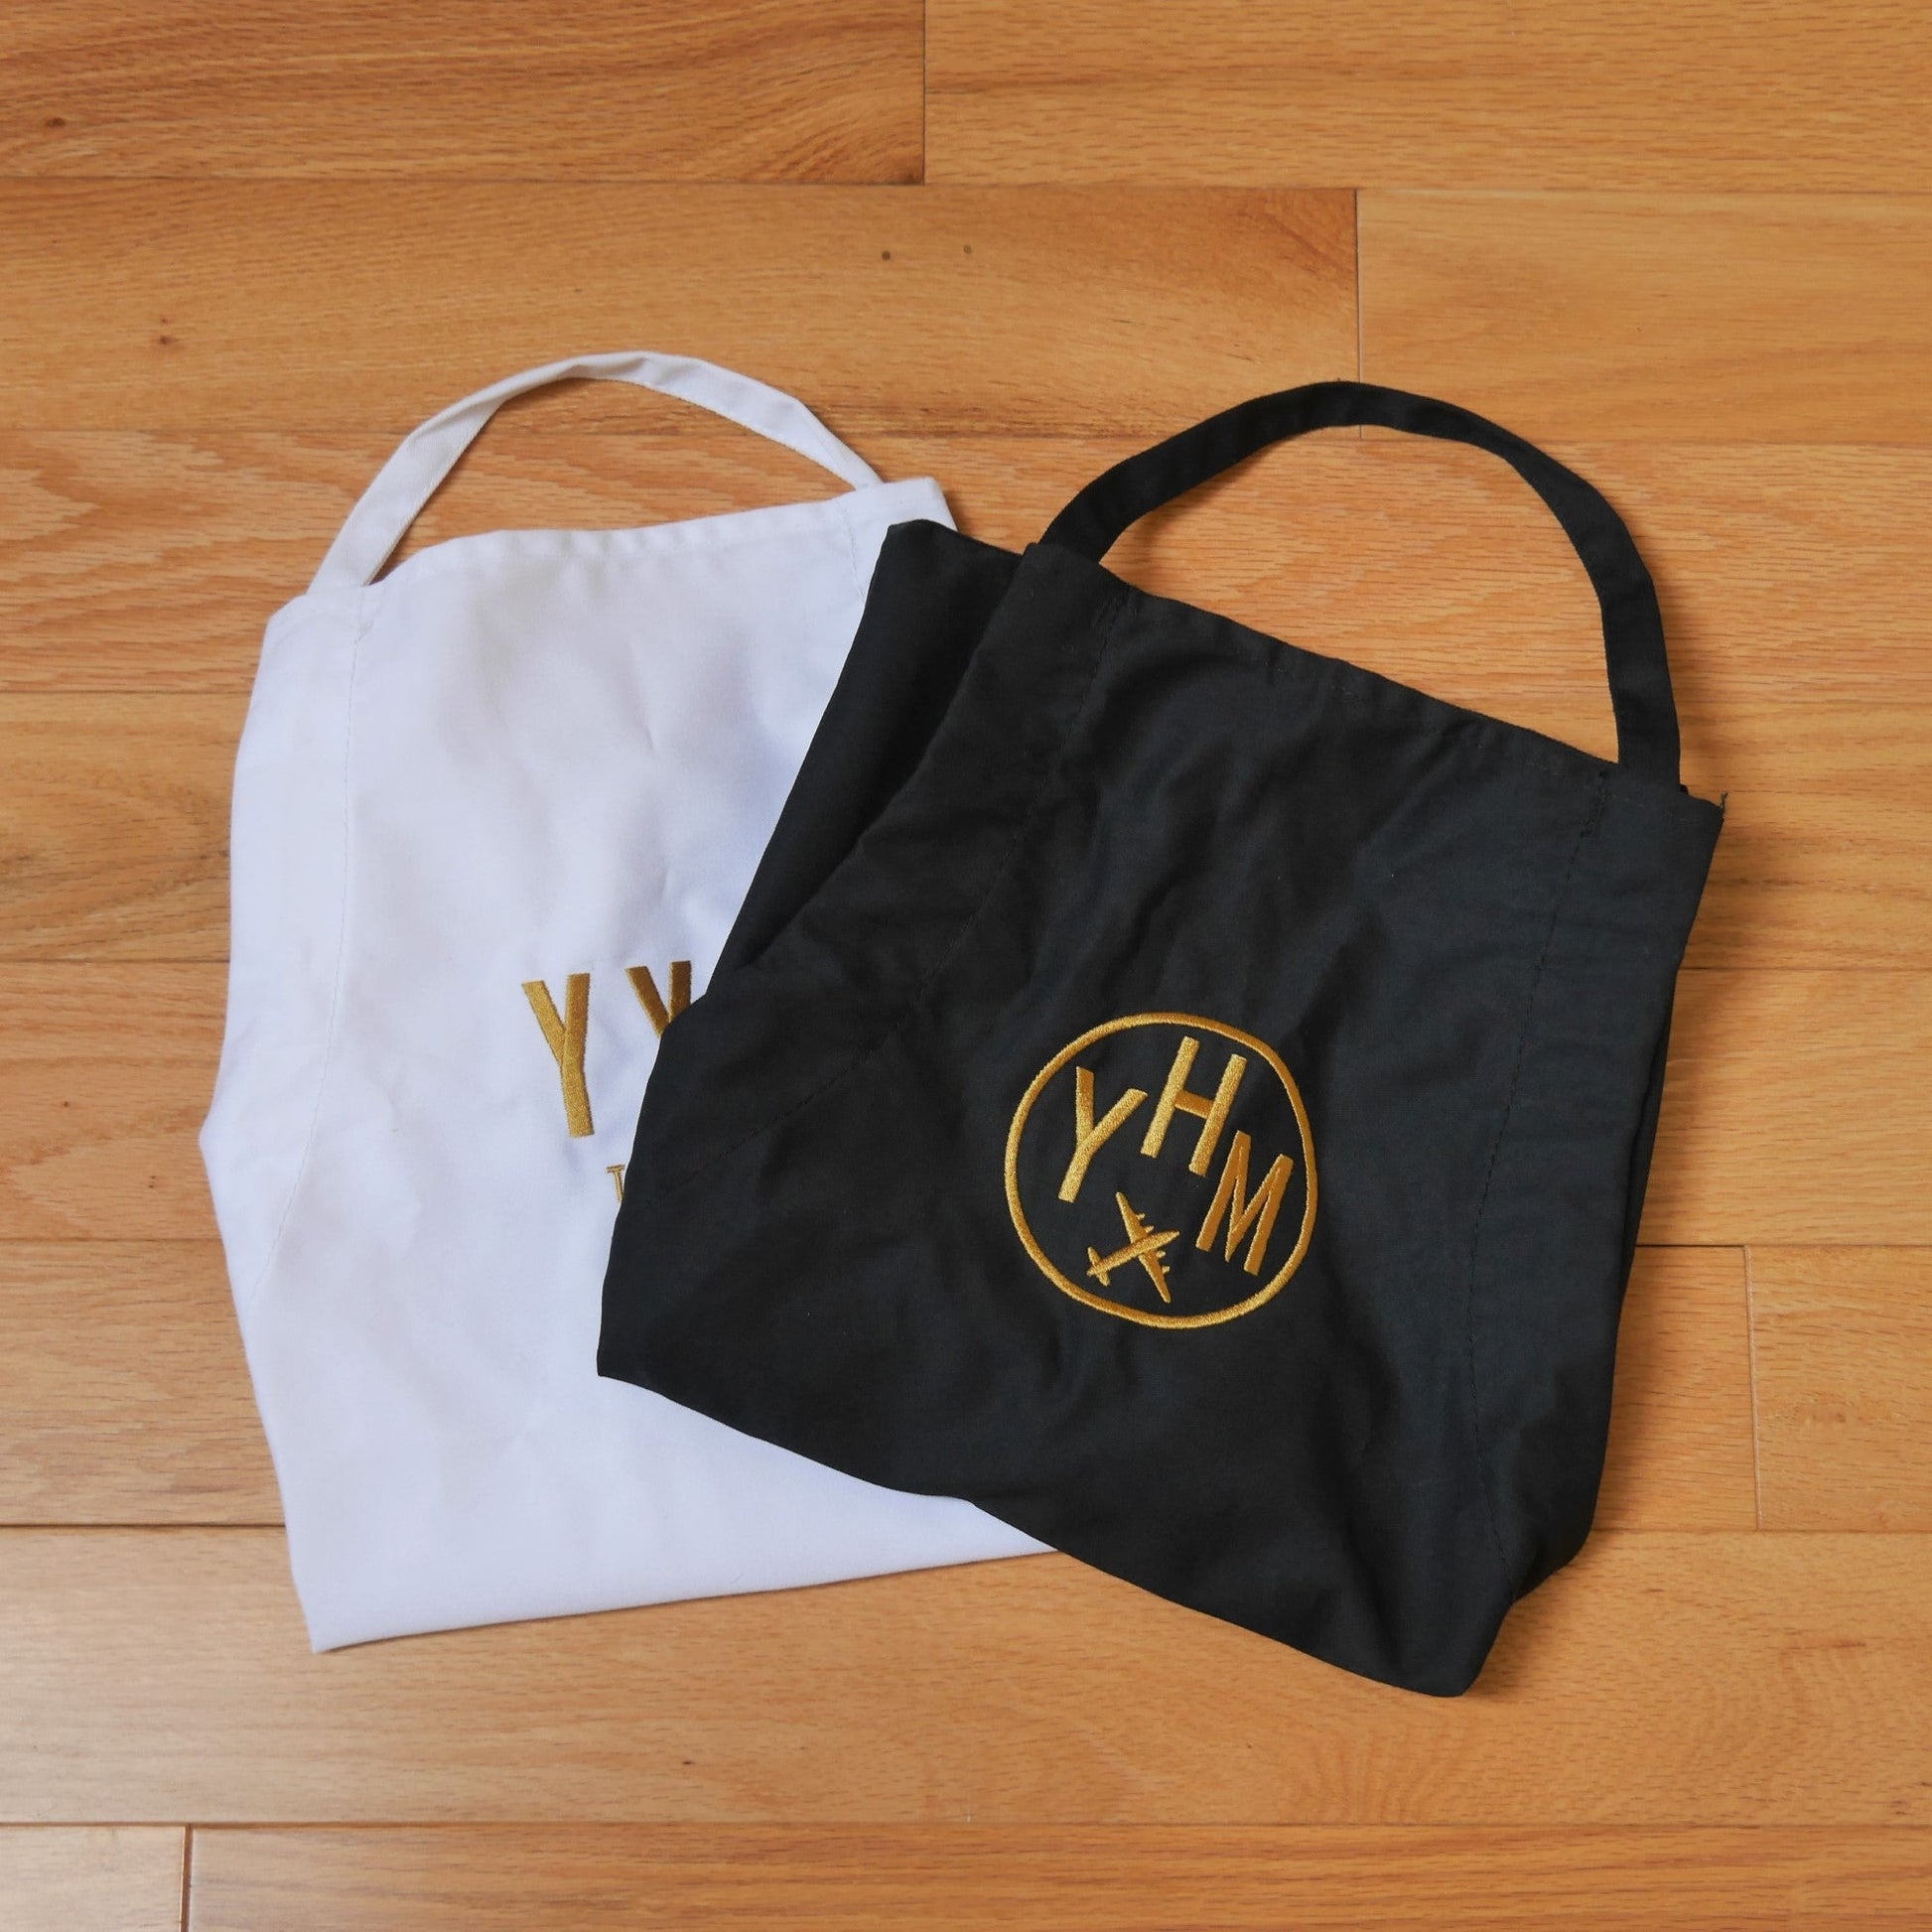 City Embroidered Apron - Old Gold • CLE Cleveland • YHM Designs - Image 14